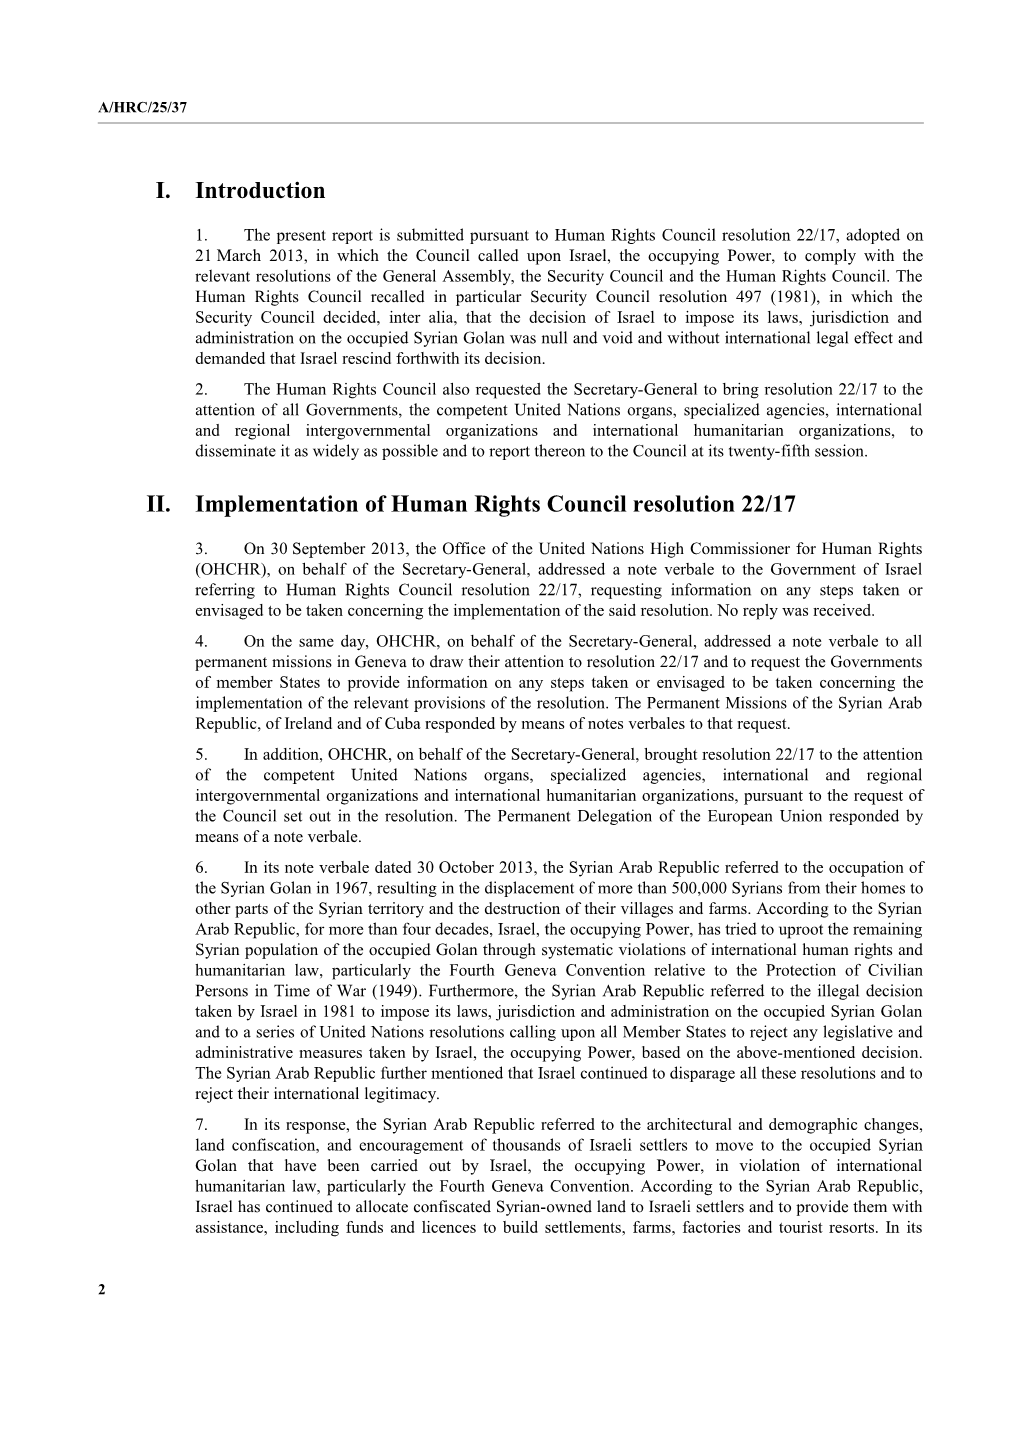 Report of the Secretary-General on Human Rights in the Occupied Syrian Golan in English